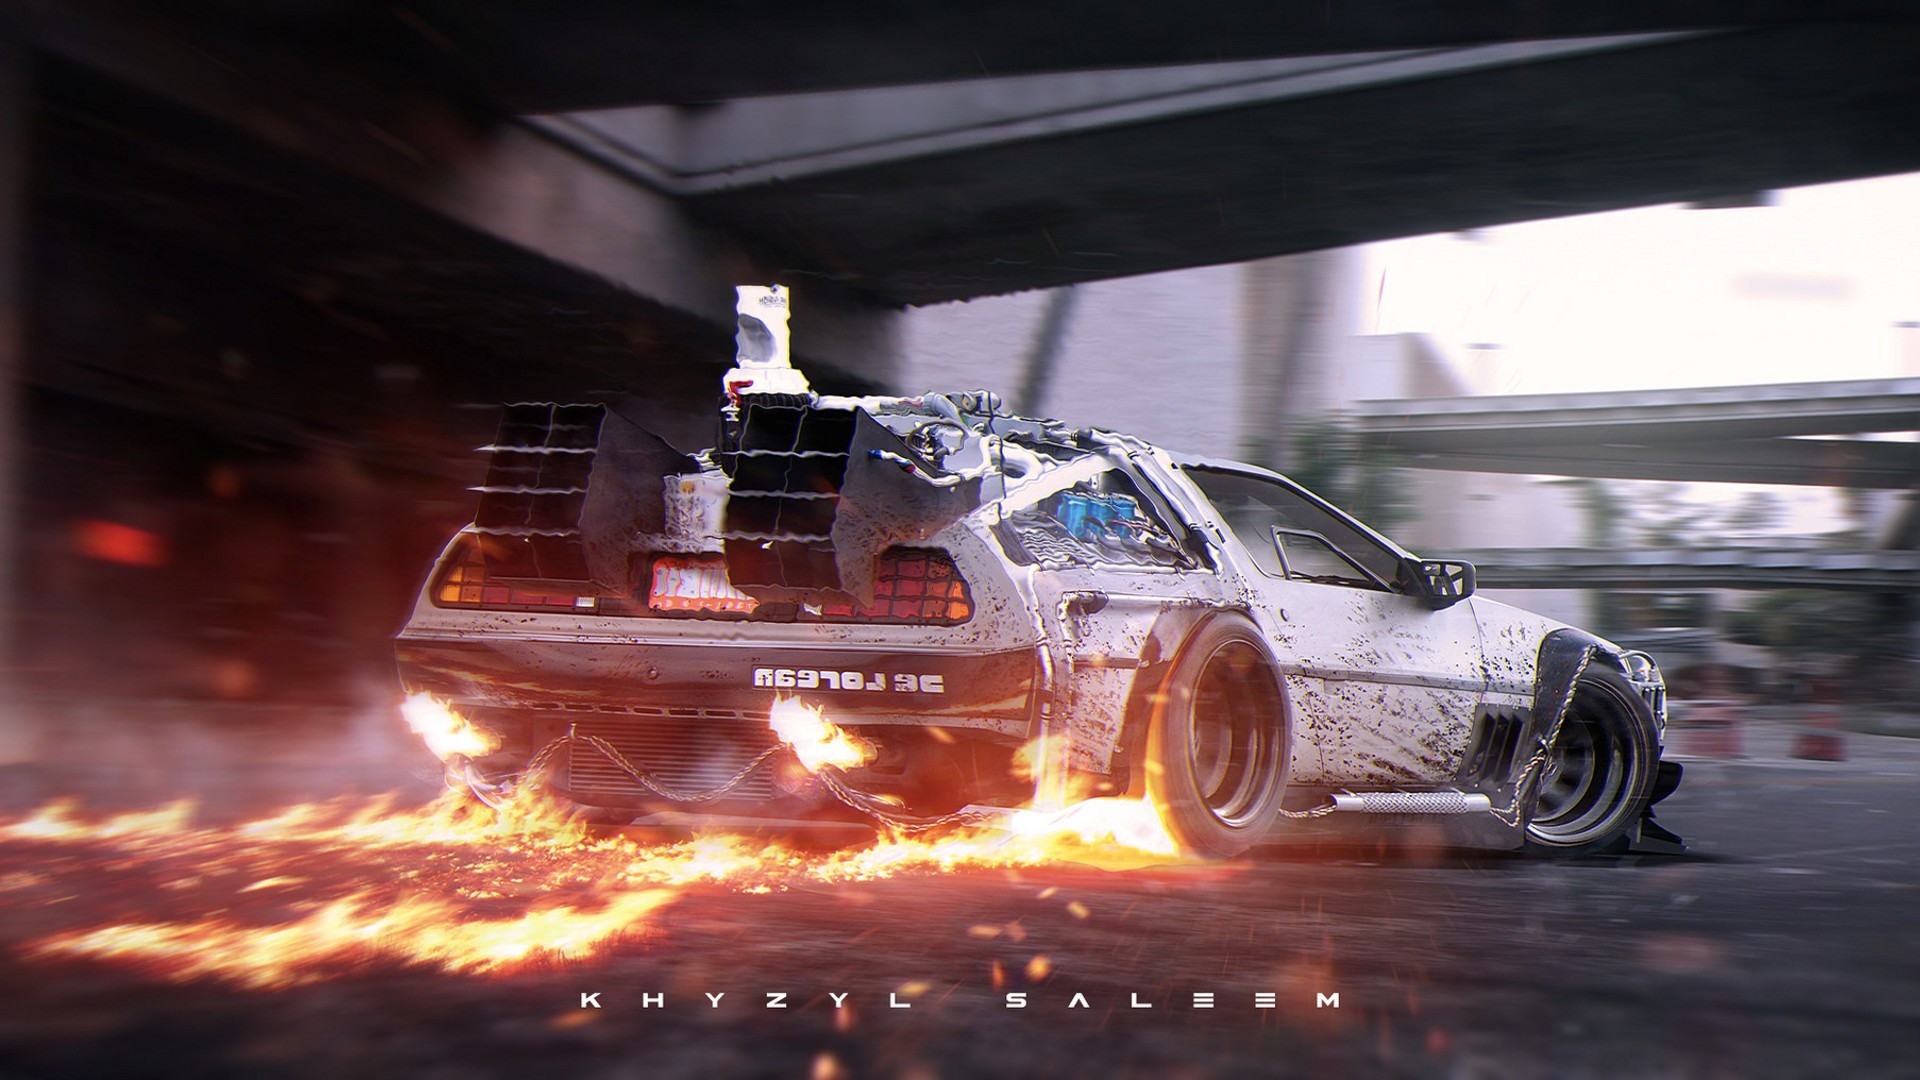 Back To The Future, DeLorean, Supercars, Time Travel, Khyzyl Saleem Wallpaper